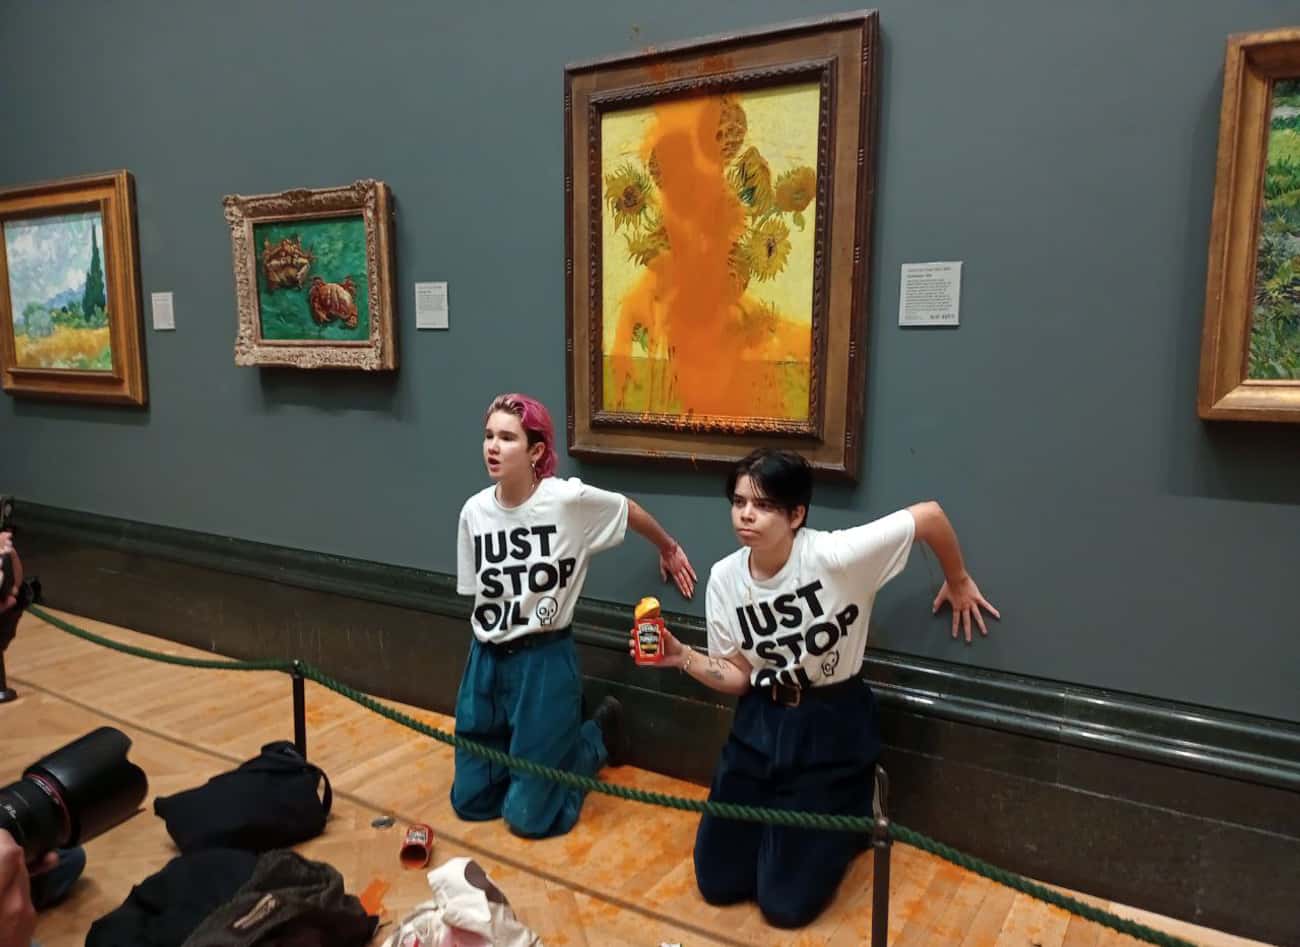 Environmentalists Vandalized Van Gogh's 'Sunflowers' Painting With Tomato Soup To Protest Oil